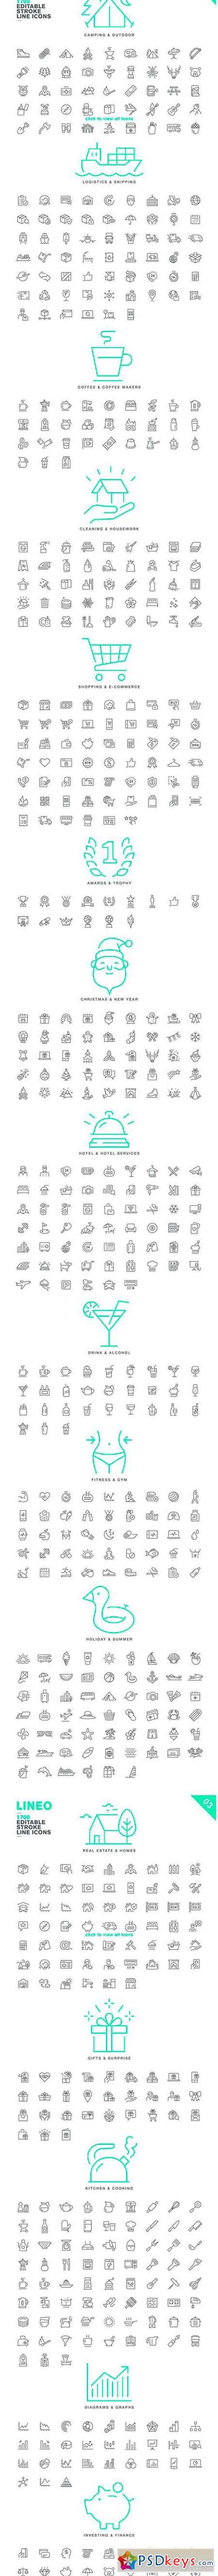 LINEO - 1700+ fully editable icons 2517764